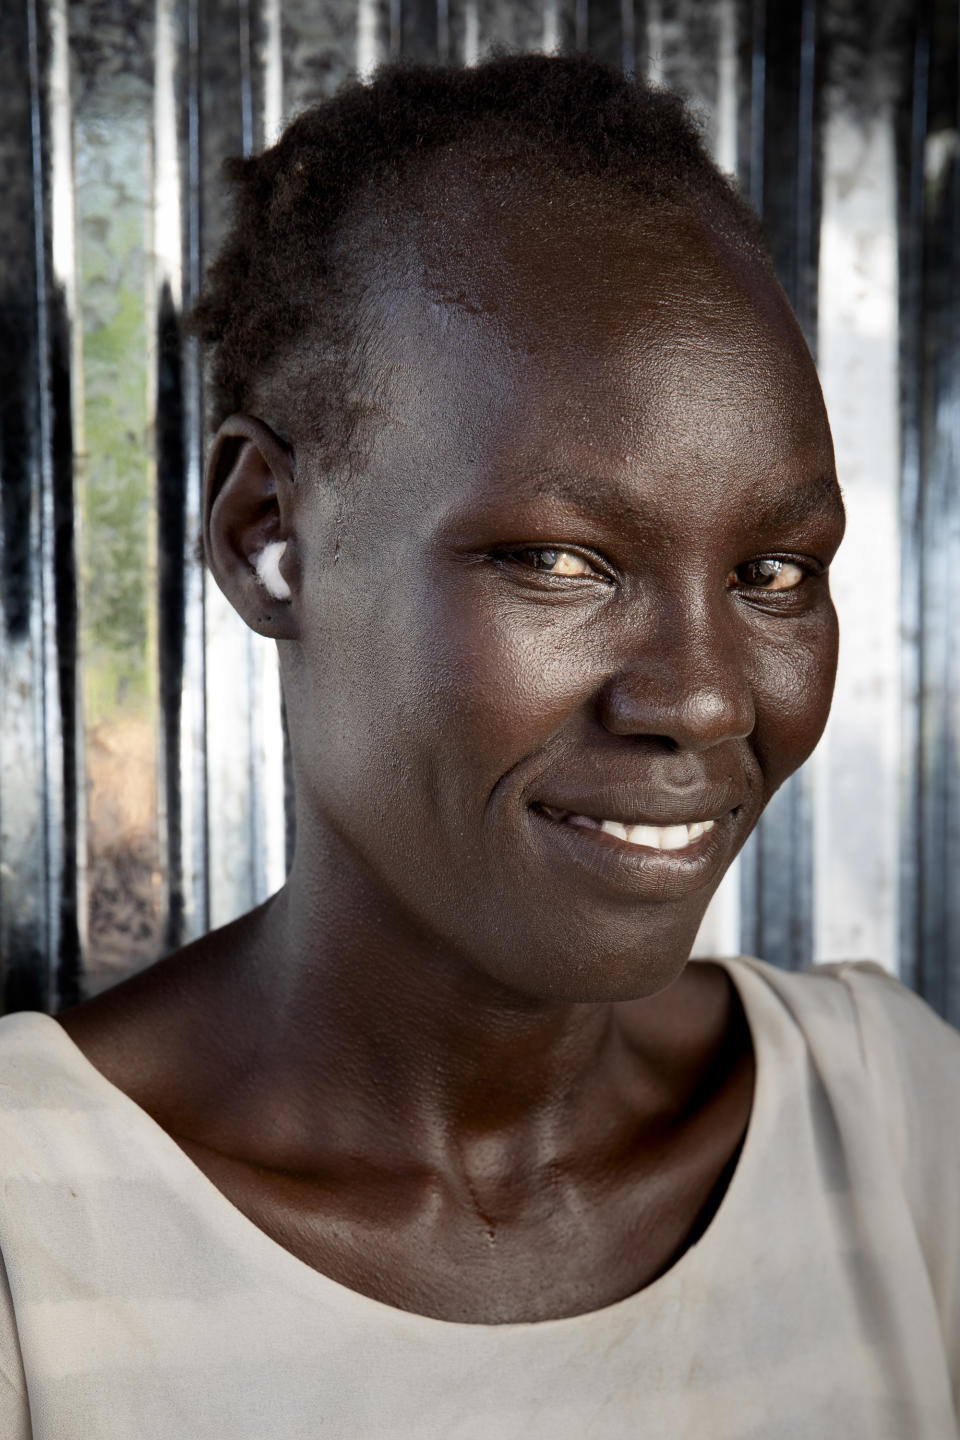 Belinda Idjidio, 36-years-old mother of 5, poses for a portrait at Paska Itwari Beda's Juba, South Sudan home, Saturday, May 29, 2021. With resources scarce, Beda and nine women formed a group that meets and contributes two of the barest necessities for warding off hunger and illness - money and bars of soap. They gather on Fridays, pooling supplies and handing them out to a different family every week. Over coffee, they share advice. (AP Photo/Adrienne Surprenant)